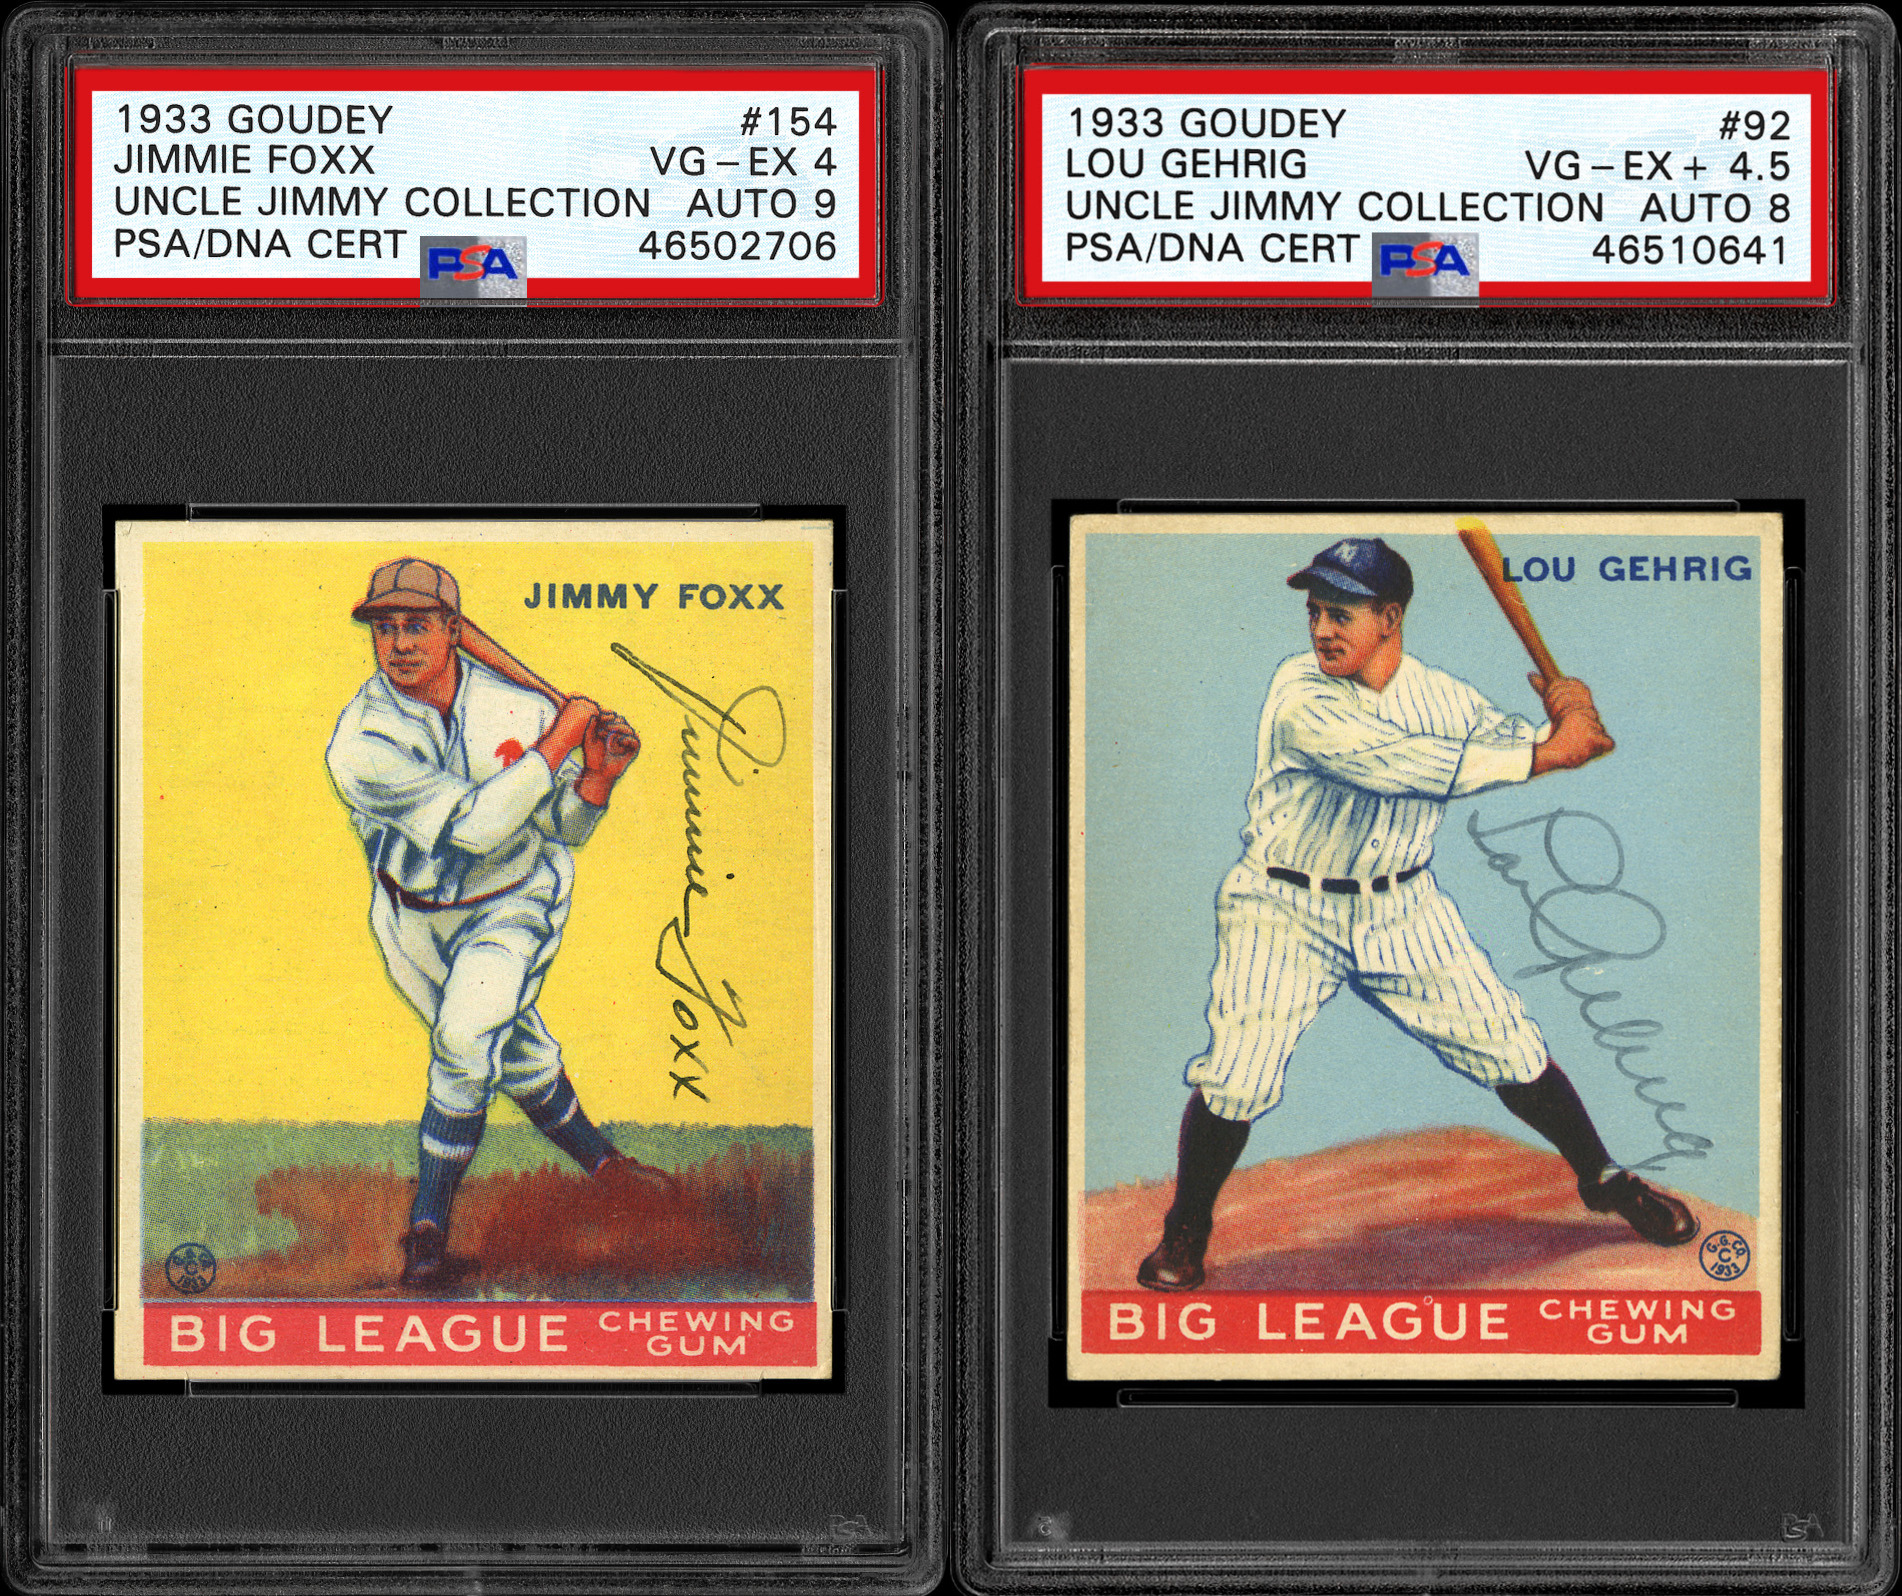 Sold at Auction: Graded 10 - Jimmie Foxx Baseball All-Time Greats Card